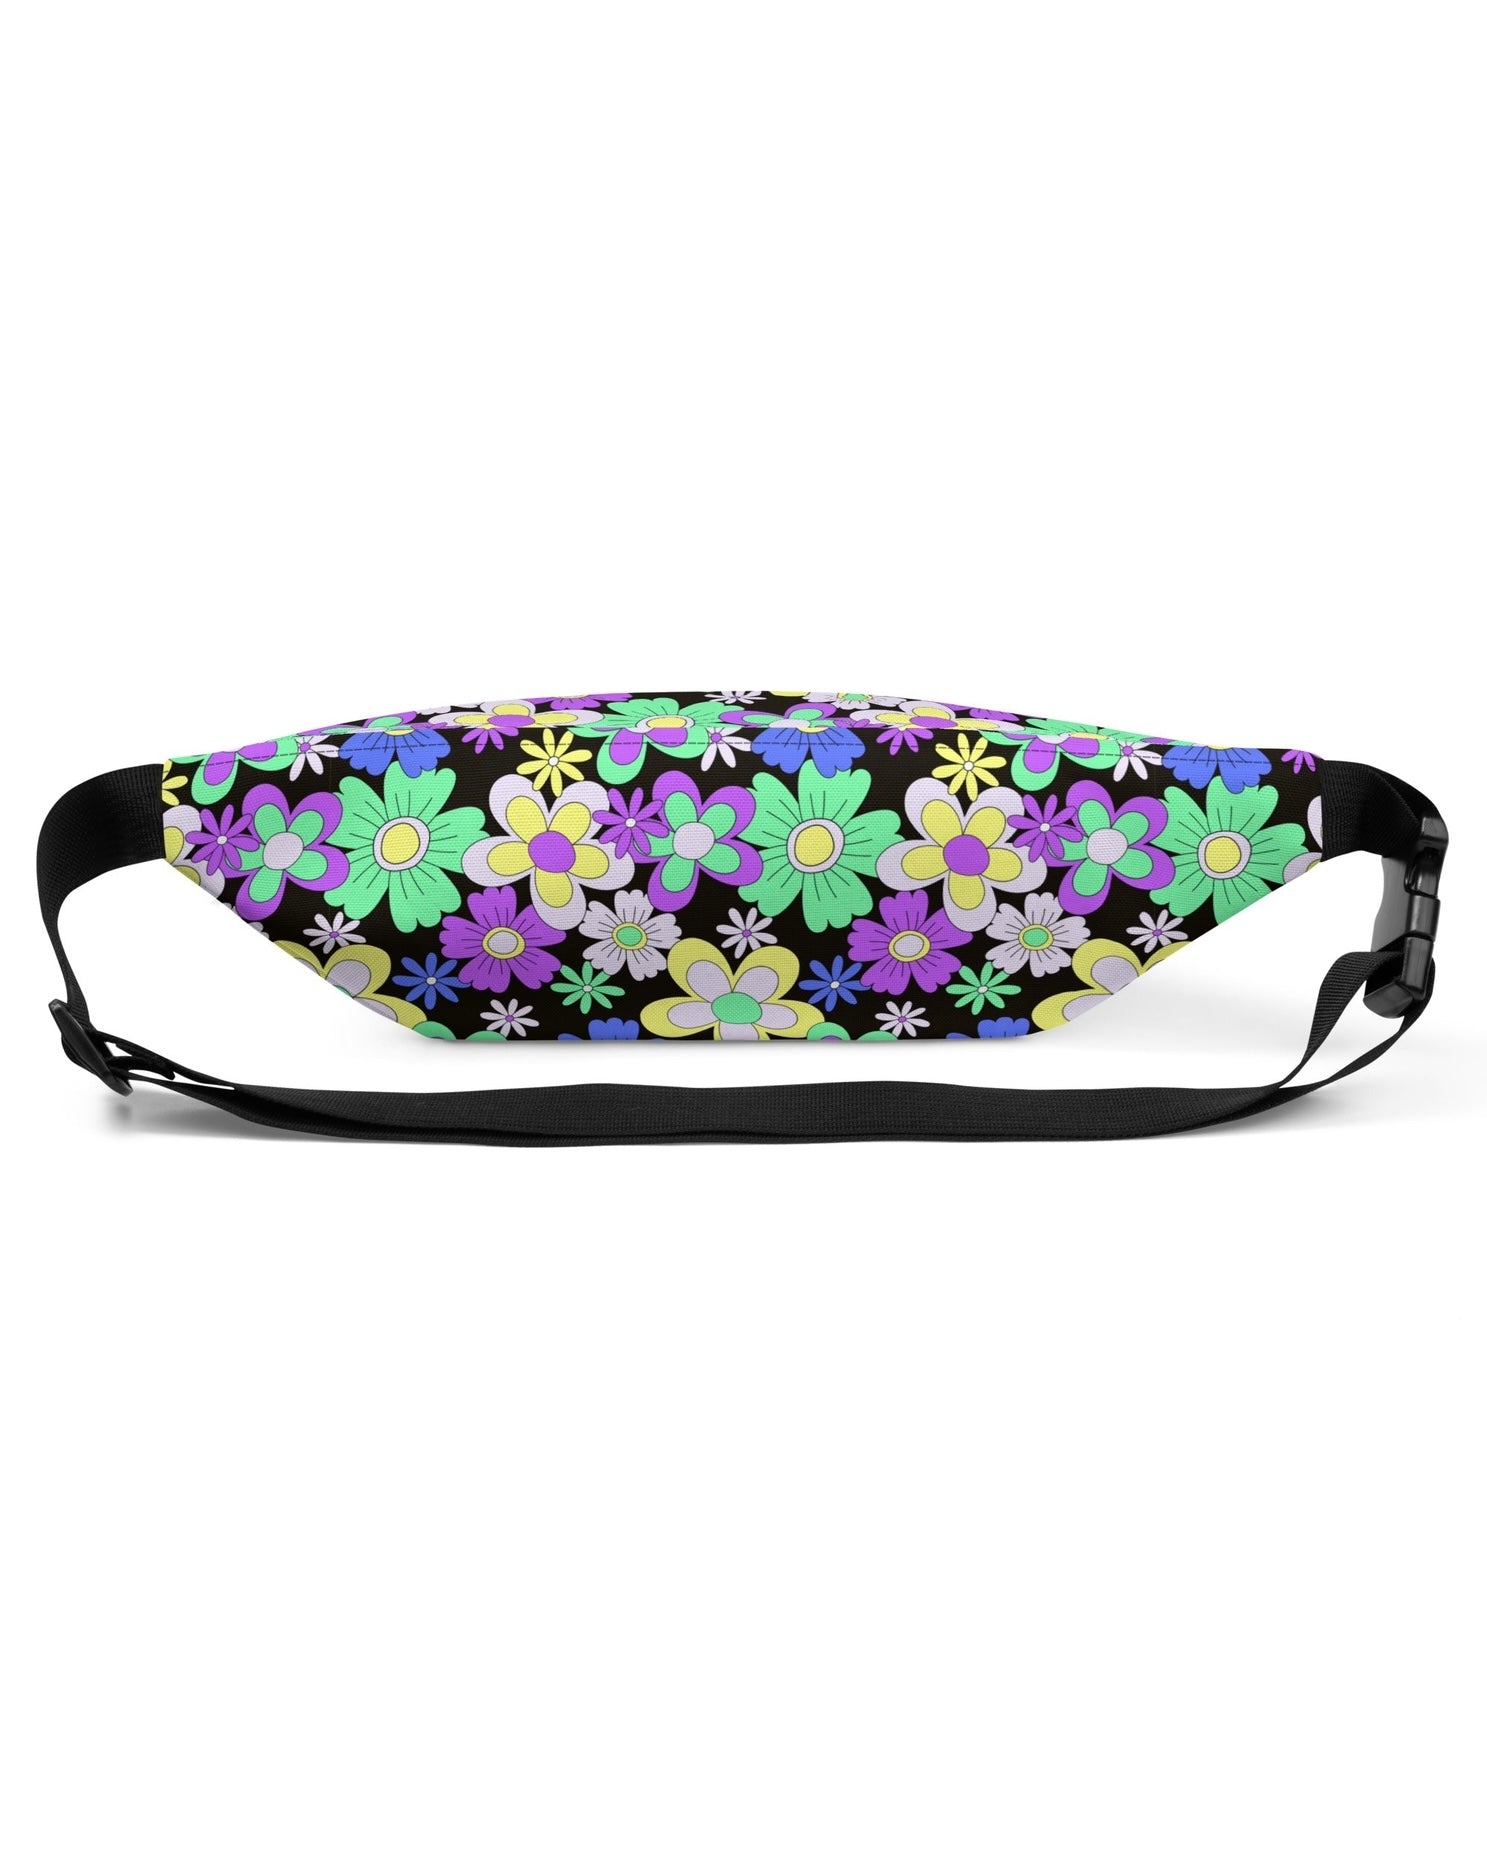 Crazy Daisy Fanny Pack, Fanny Pack, - One Stop Rave